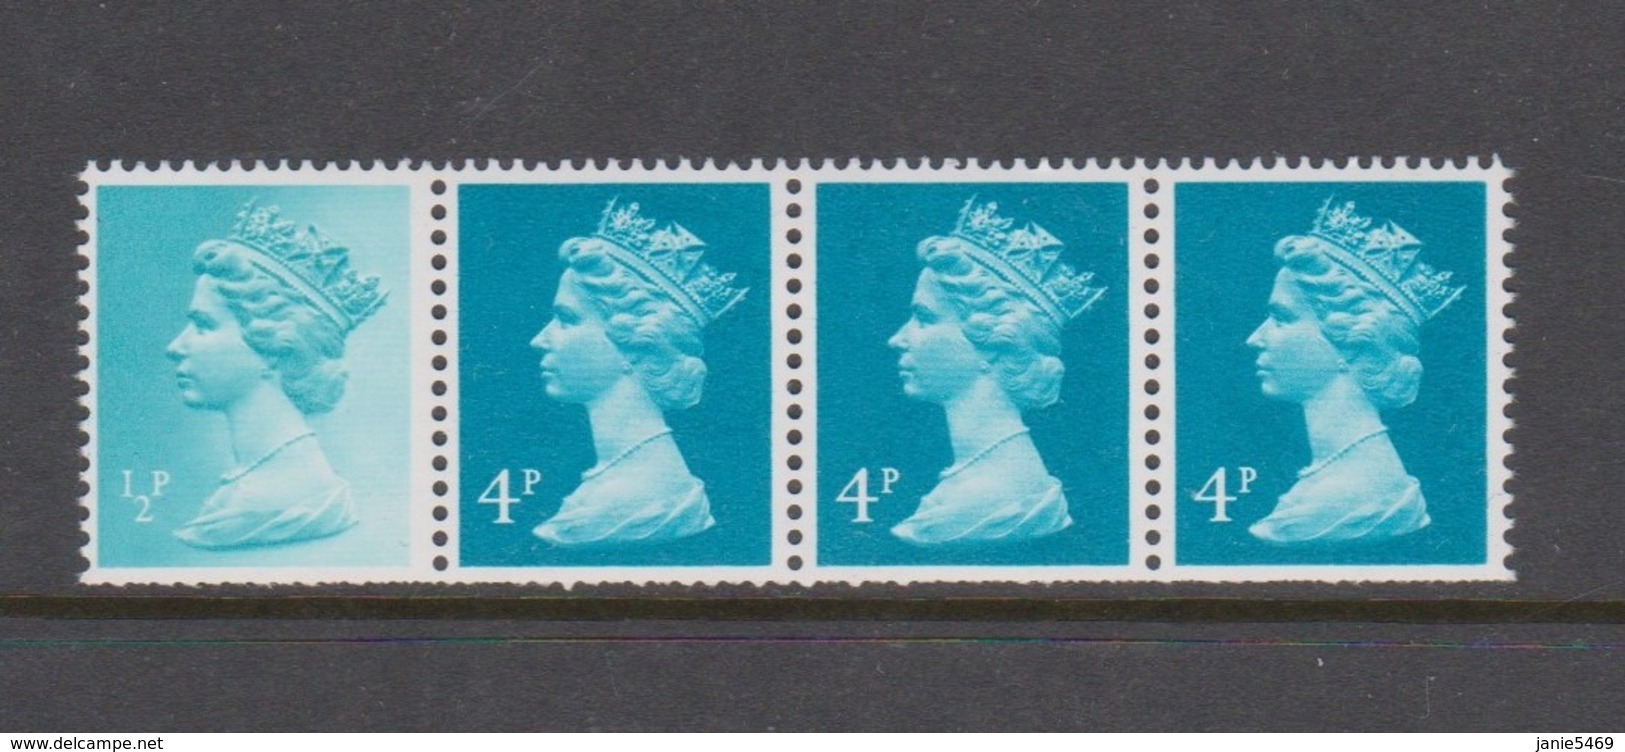 Great Britain SG B 979 Booklet Strip Mint Never Hinged - Used Stamps